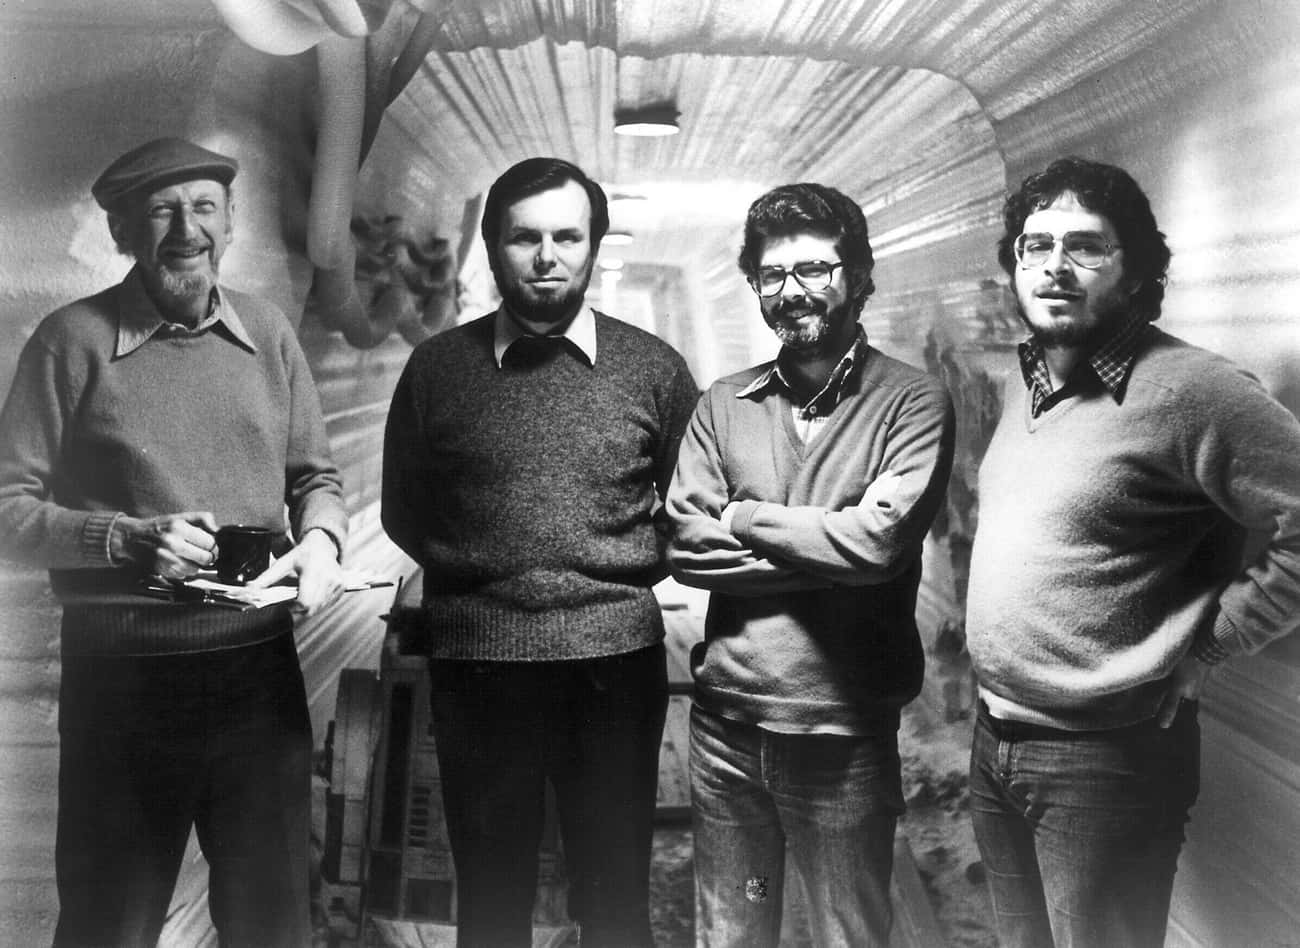 Young George Lucas in Gray V-Neck Sweater